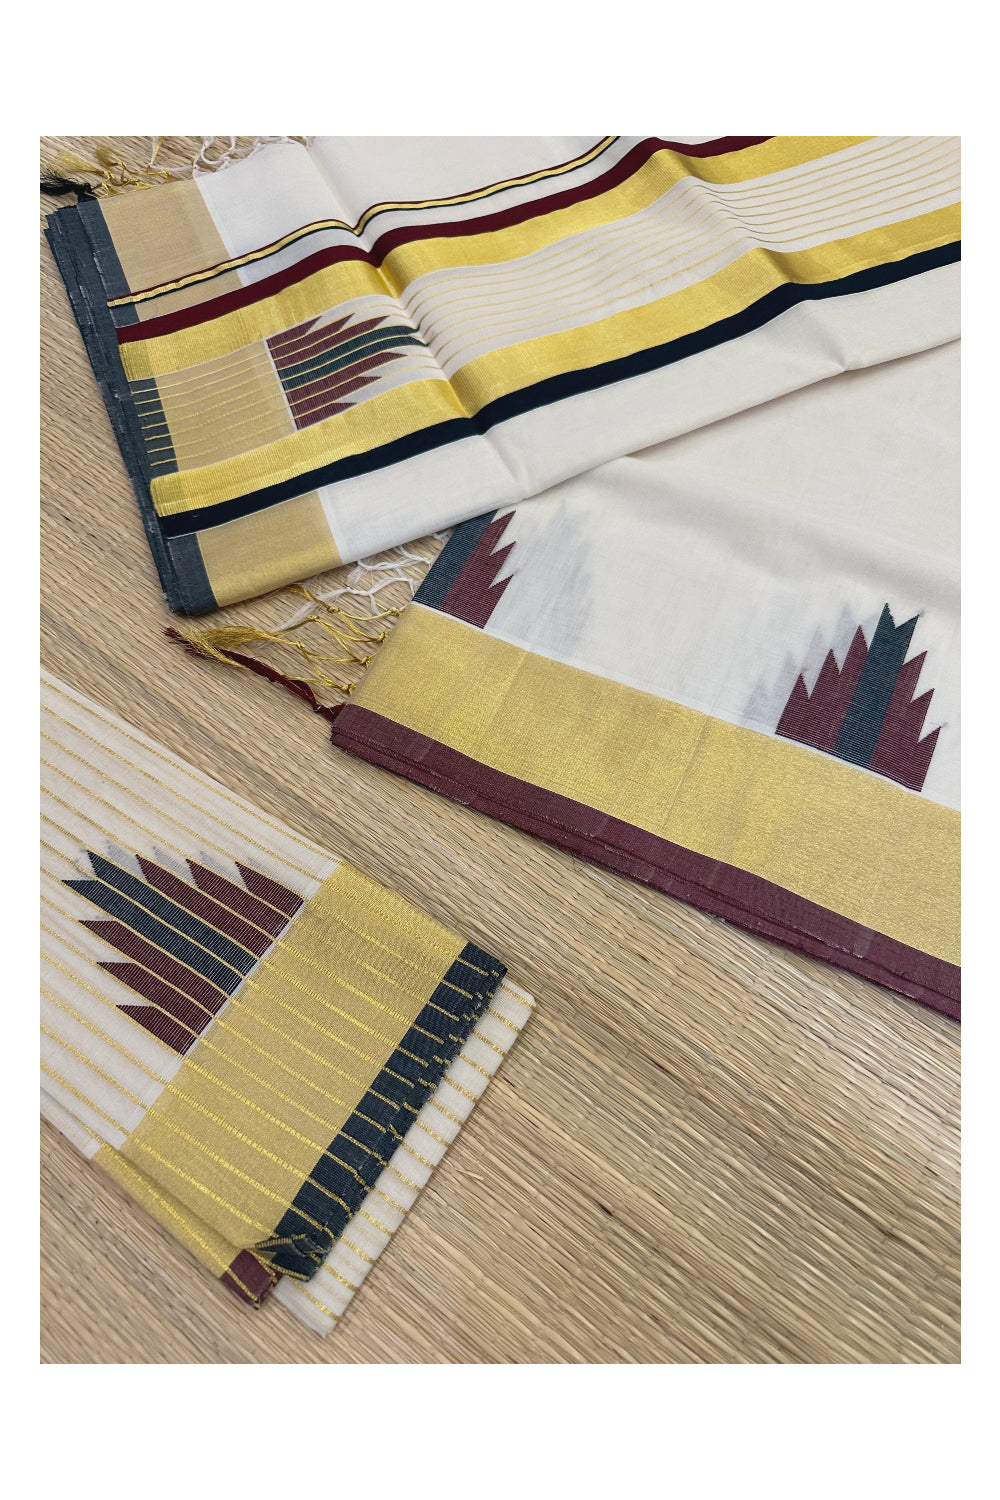 Southloom Premium Handloom Kasavu Saree with Woven Black and Maroon Temple Border (include Lines Kasavu Blouse Piece with Temple)